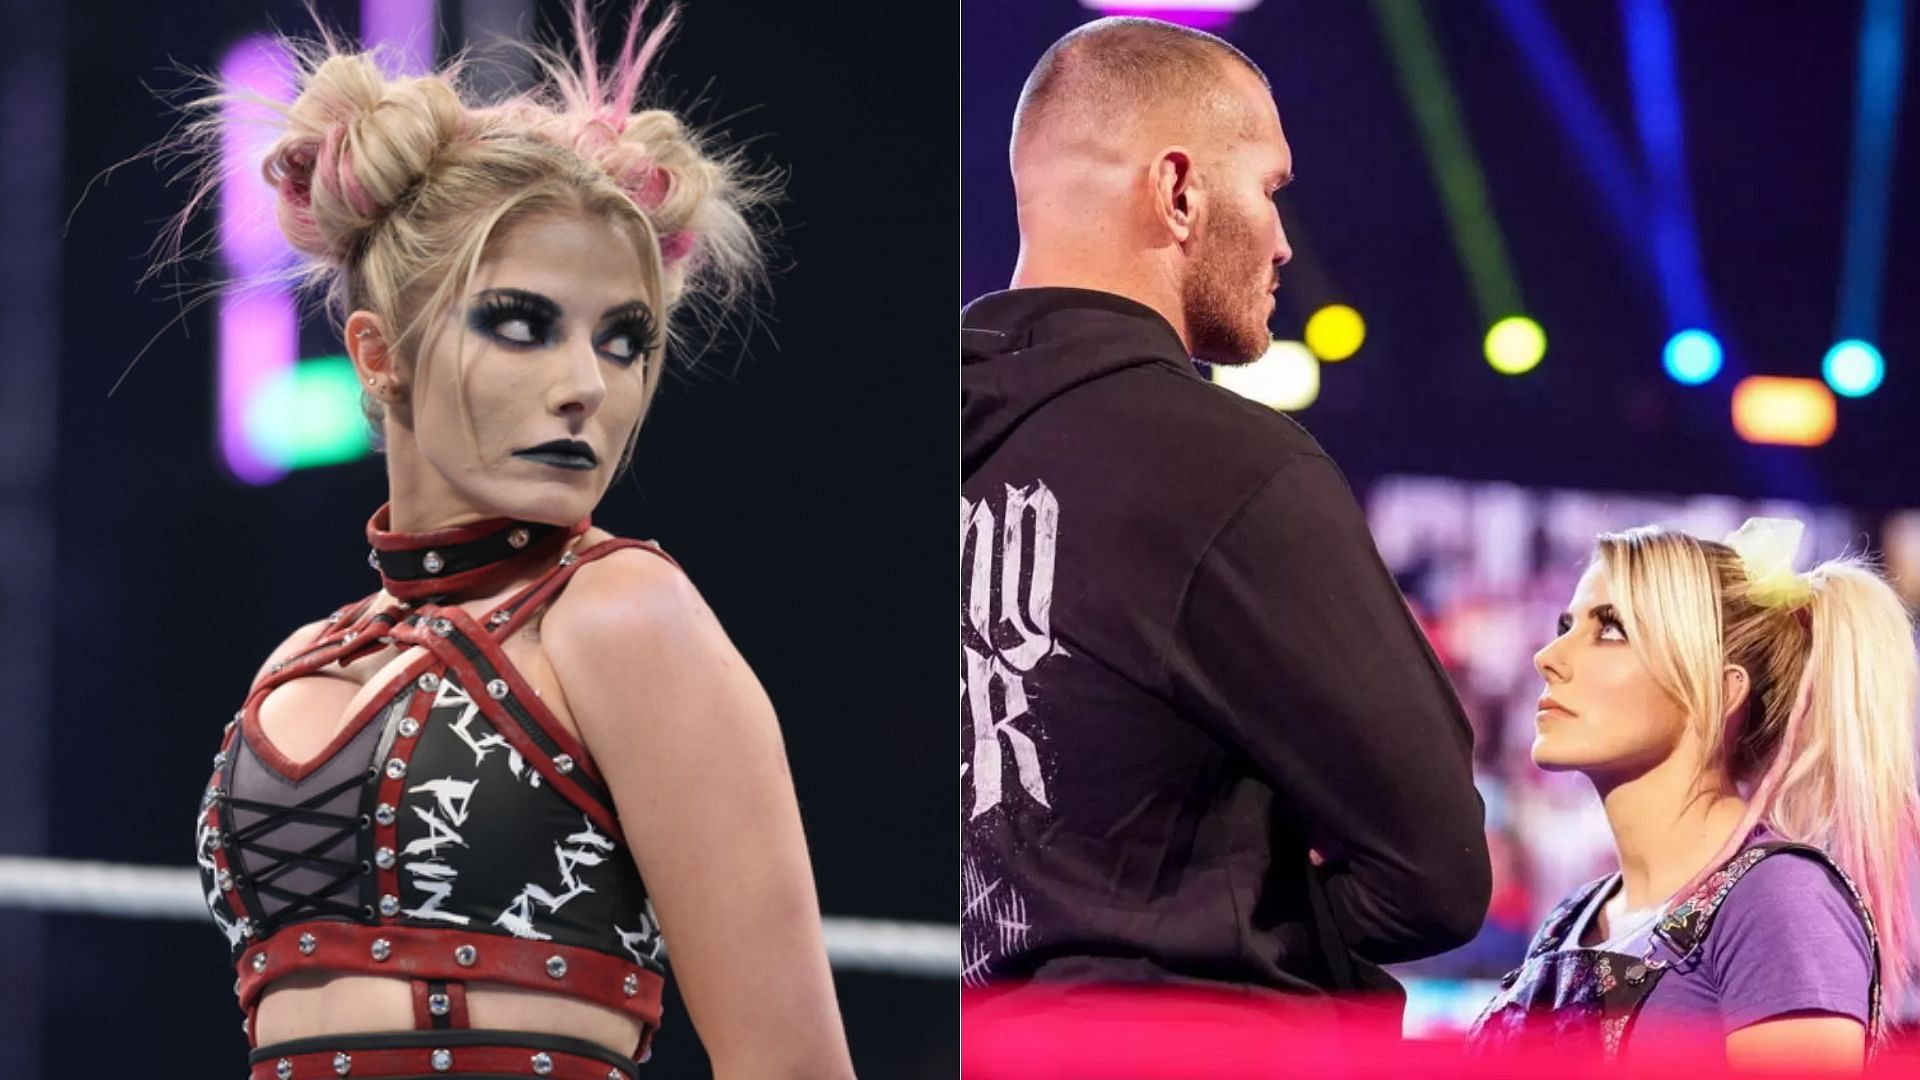 Alexa Bliss beat Randy Orton in their only match against each other.